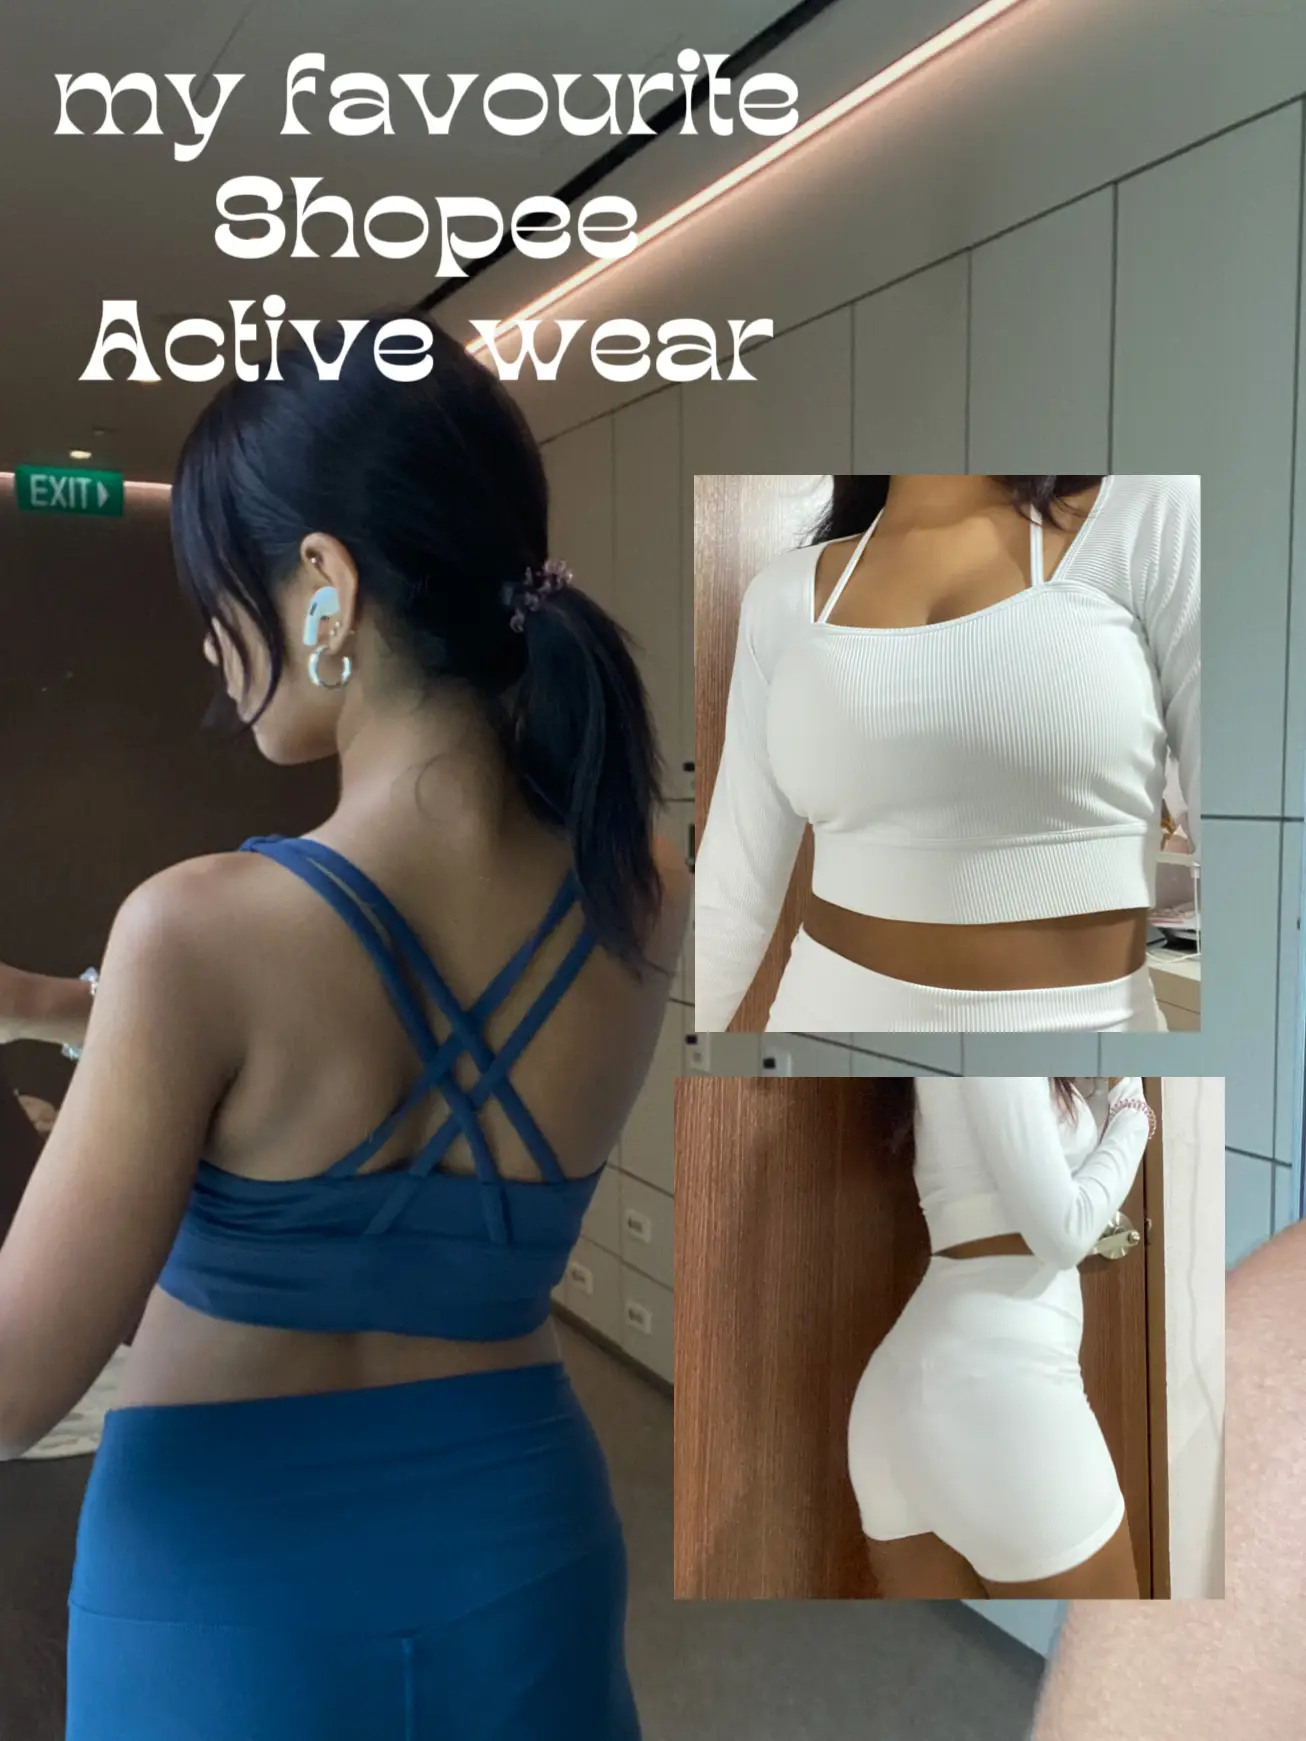 My favourite Shopee activewear!